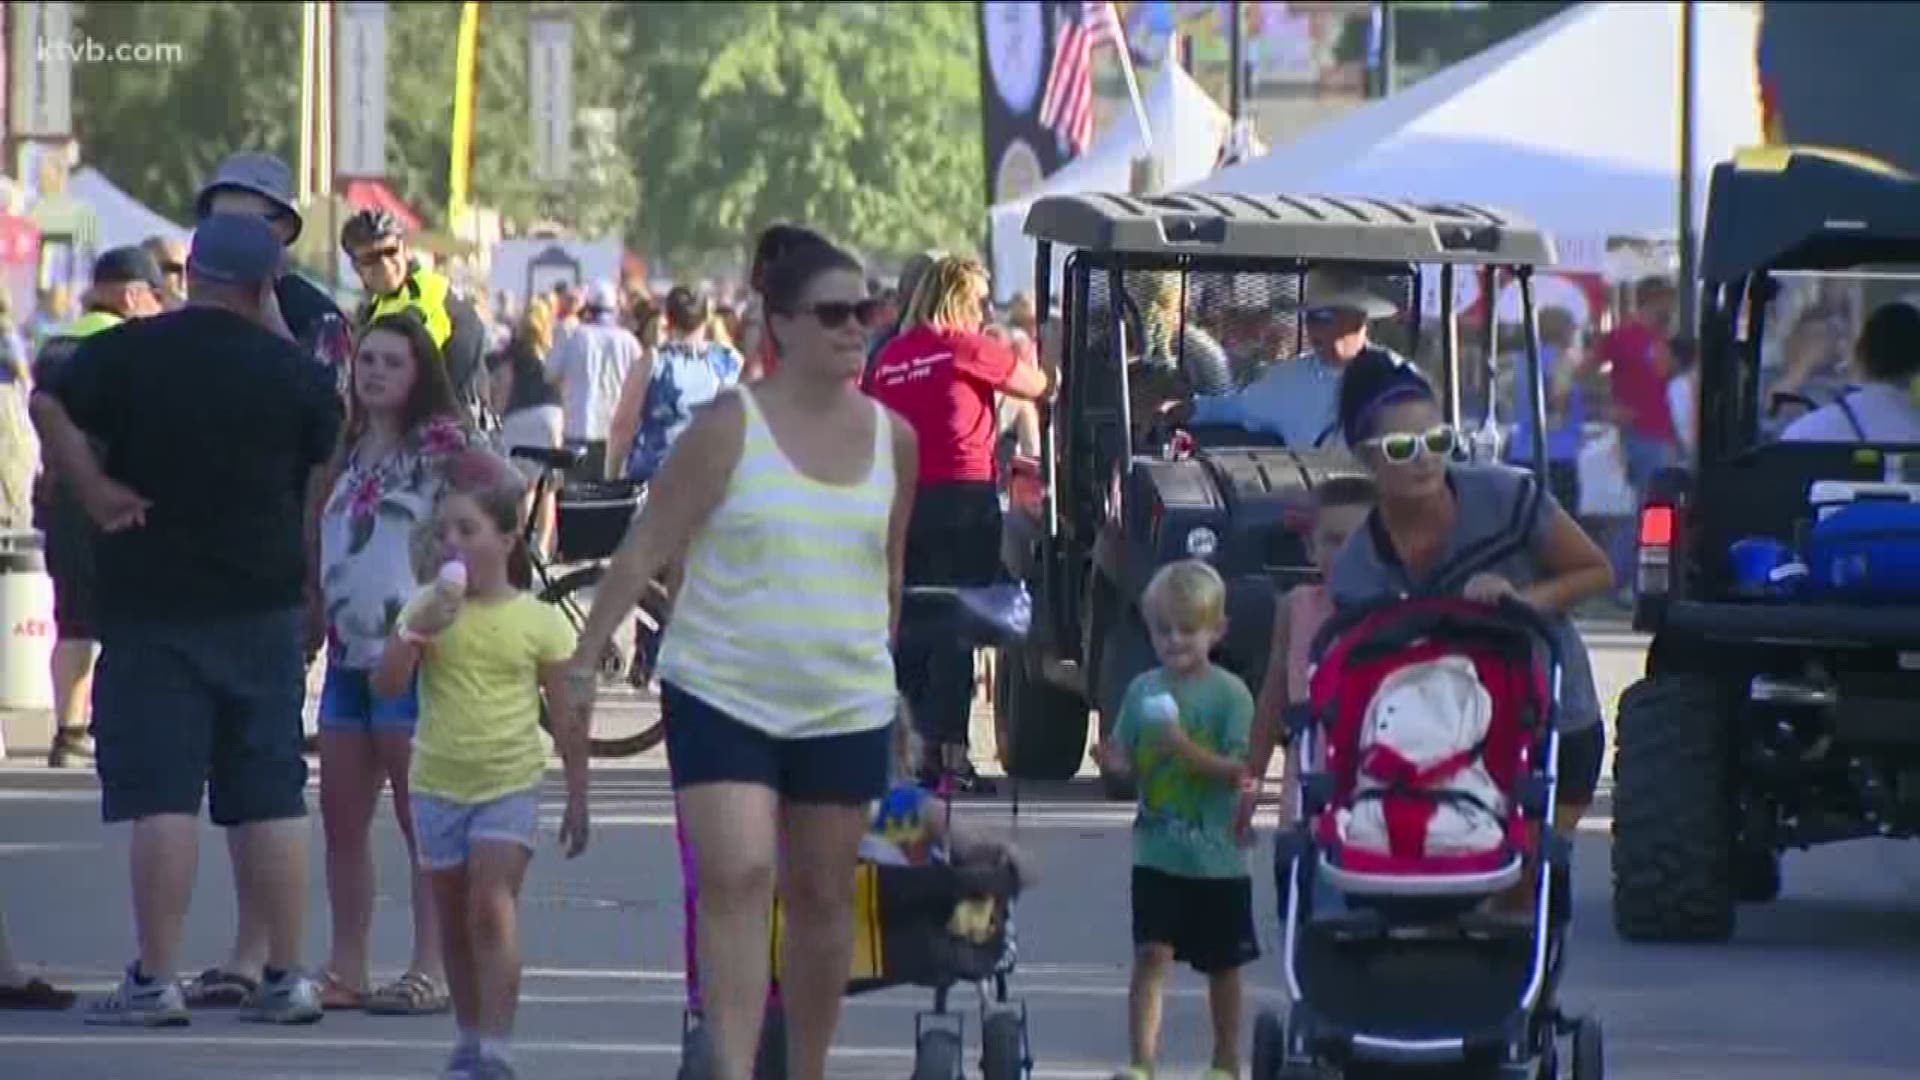 Idaho law states people can carry guns on public property, which includes fairs.